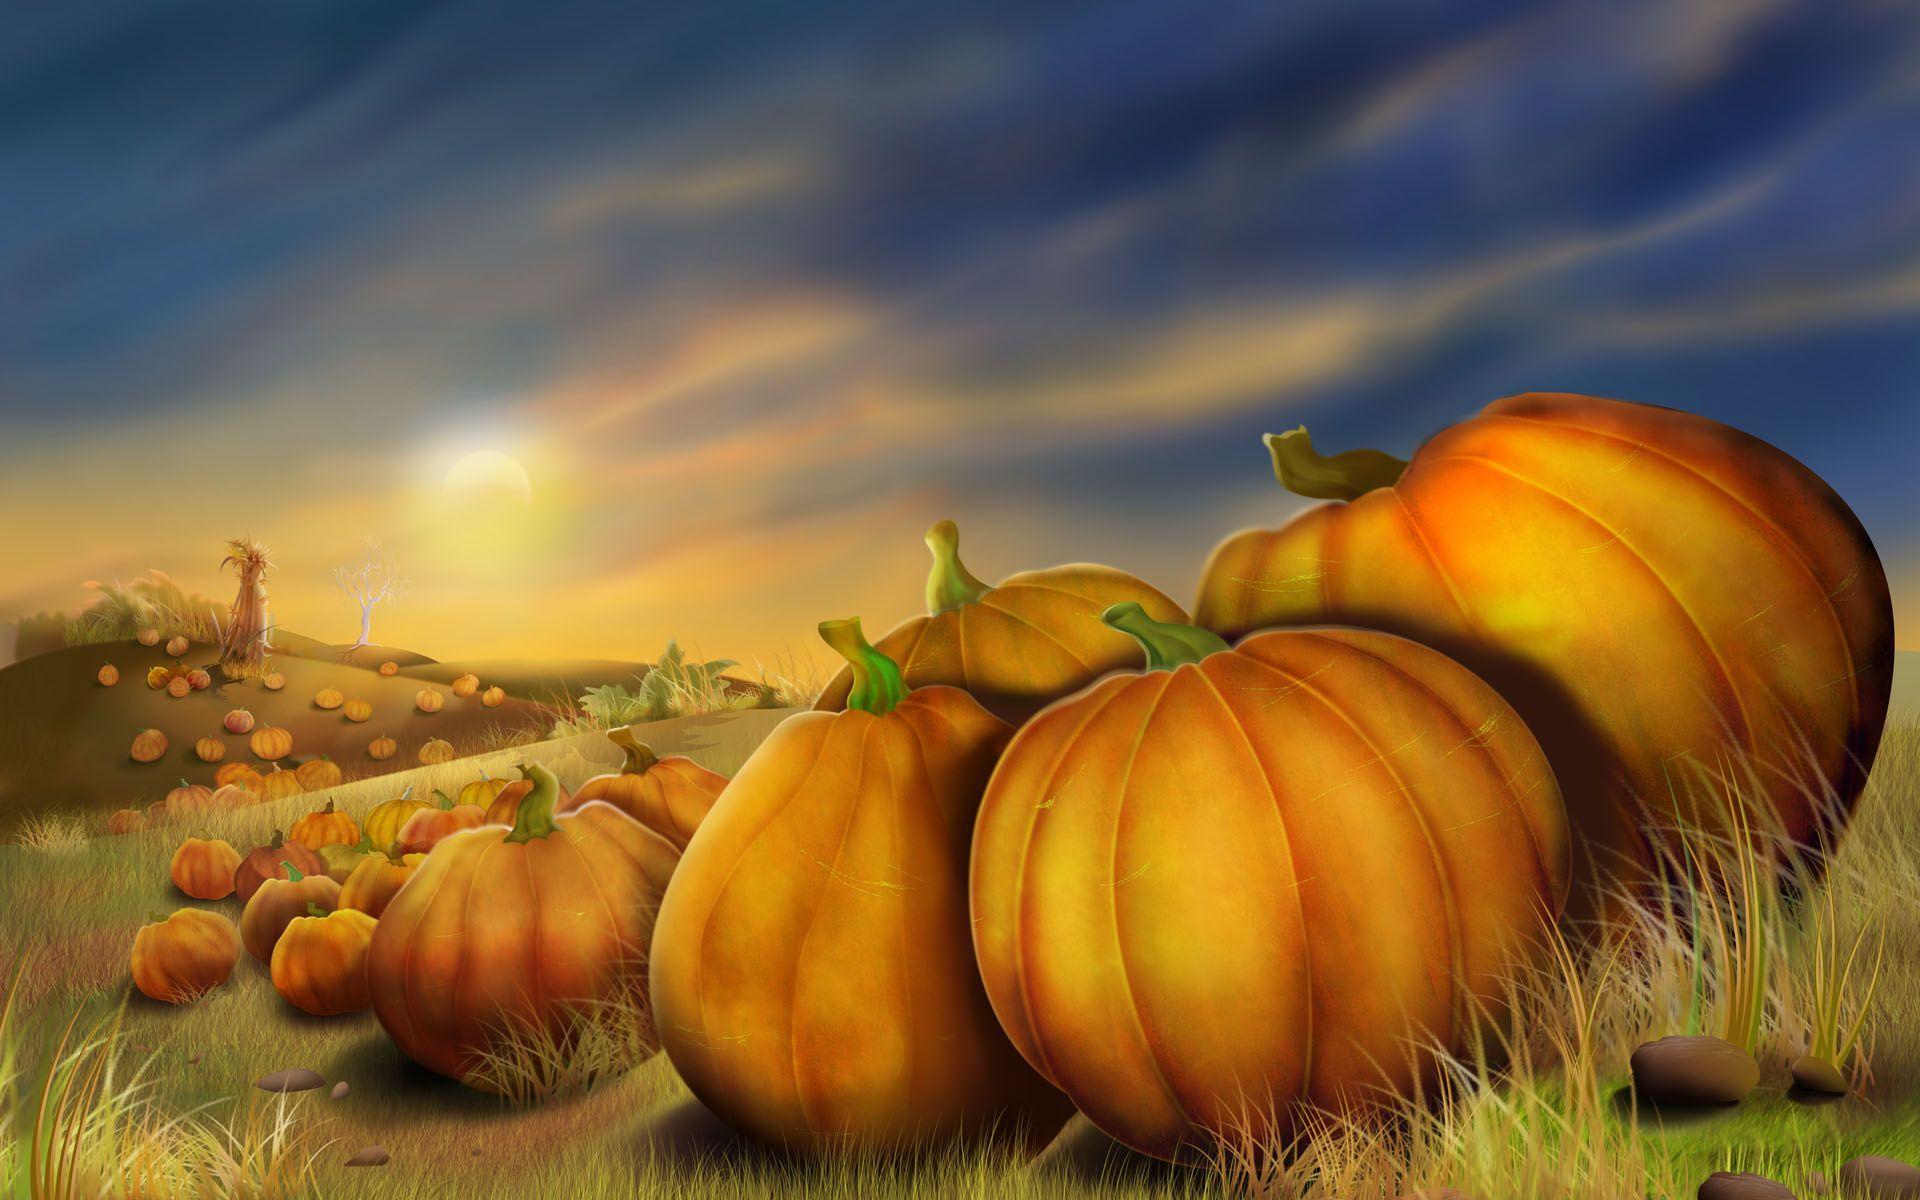 Happy Thanksgiving HD Wallpaper, Image 2014 For You